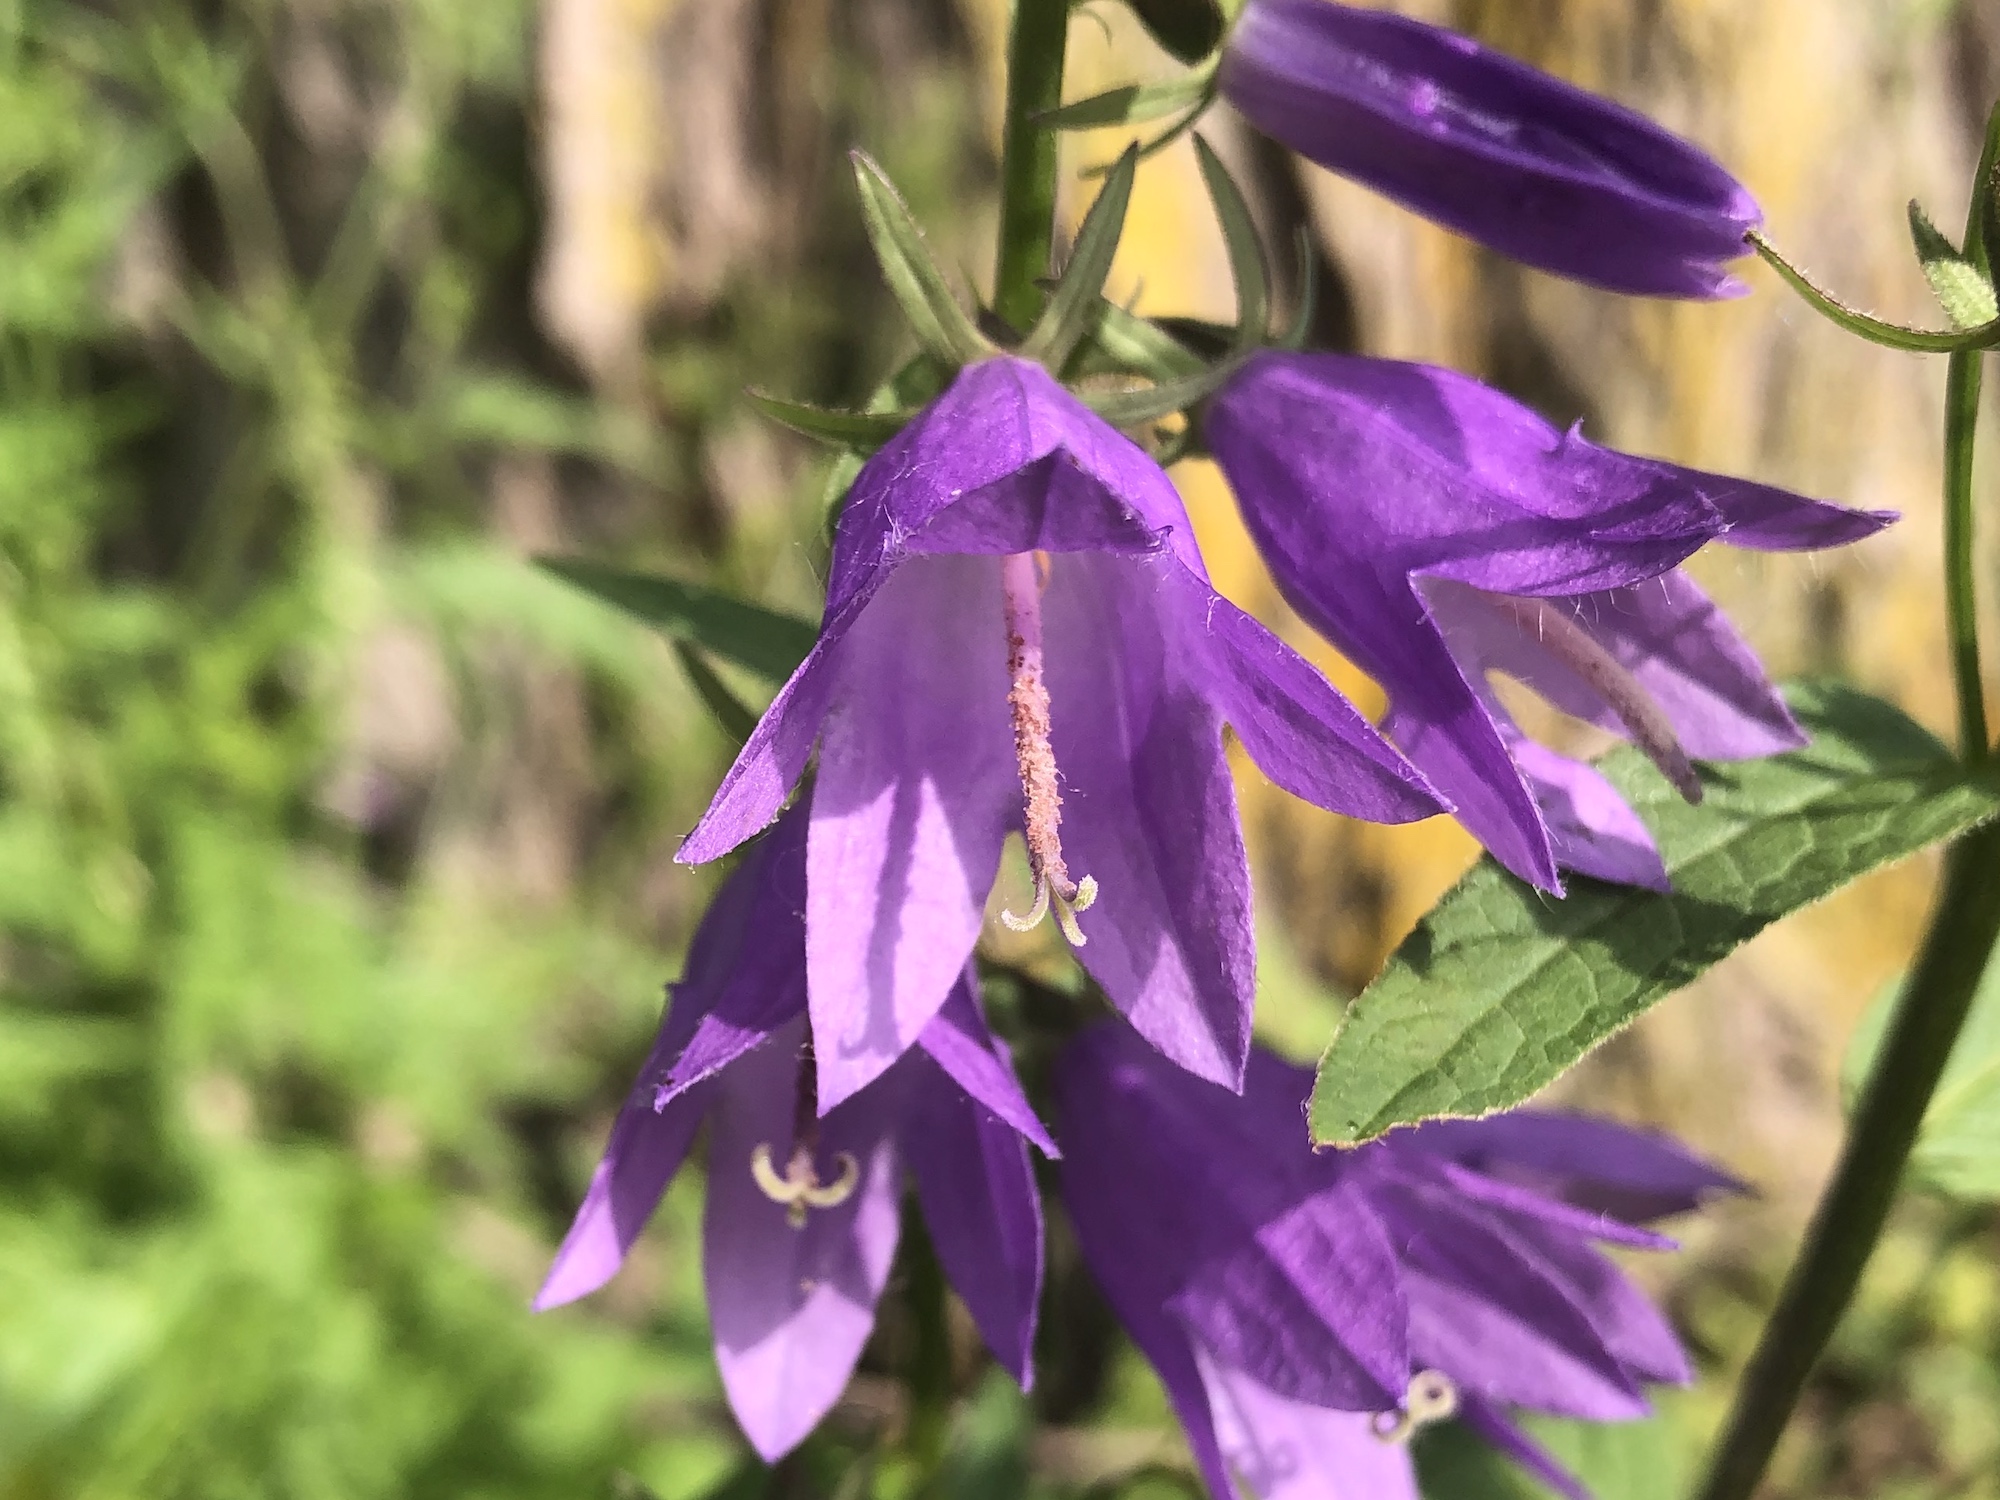 Creeping Bellflower on Manitou Way in Madison, Wisconsin on June 29, 2020.